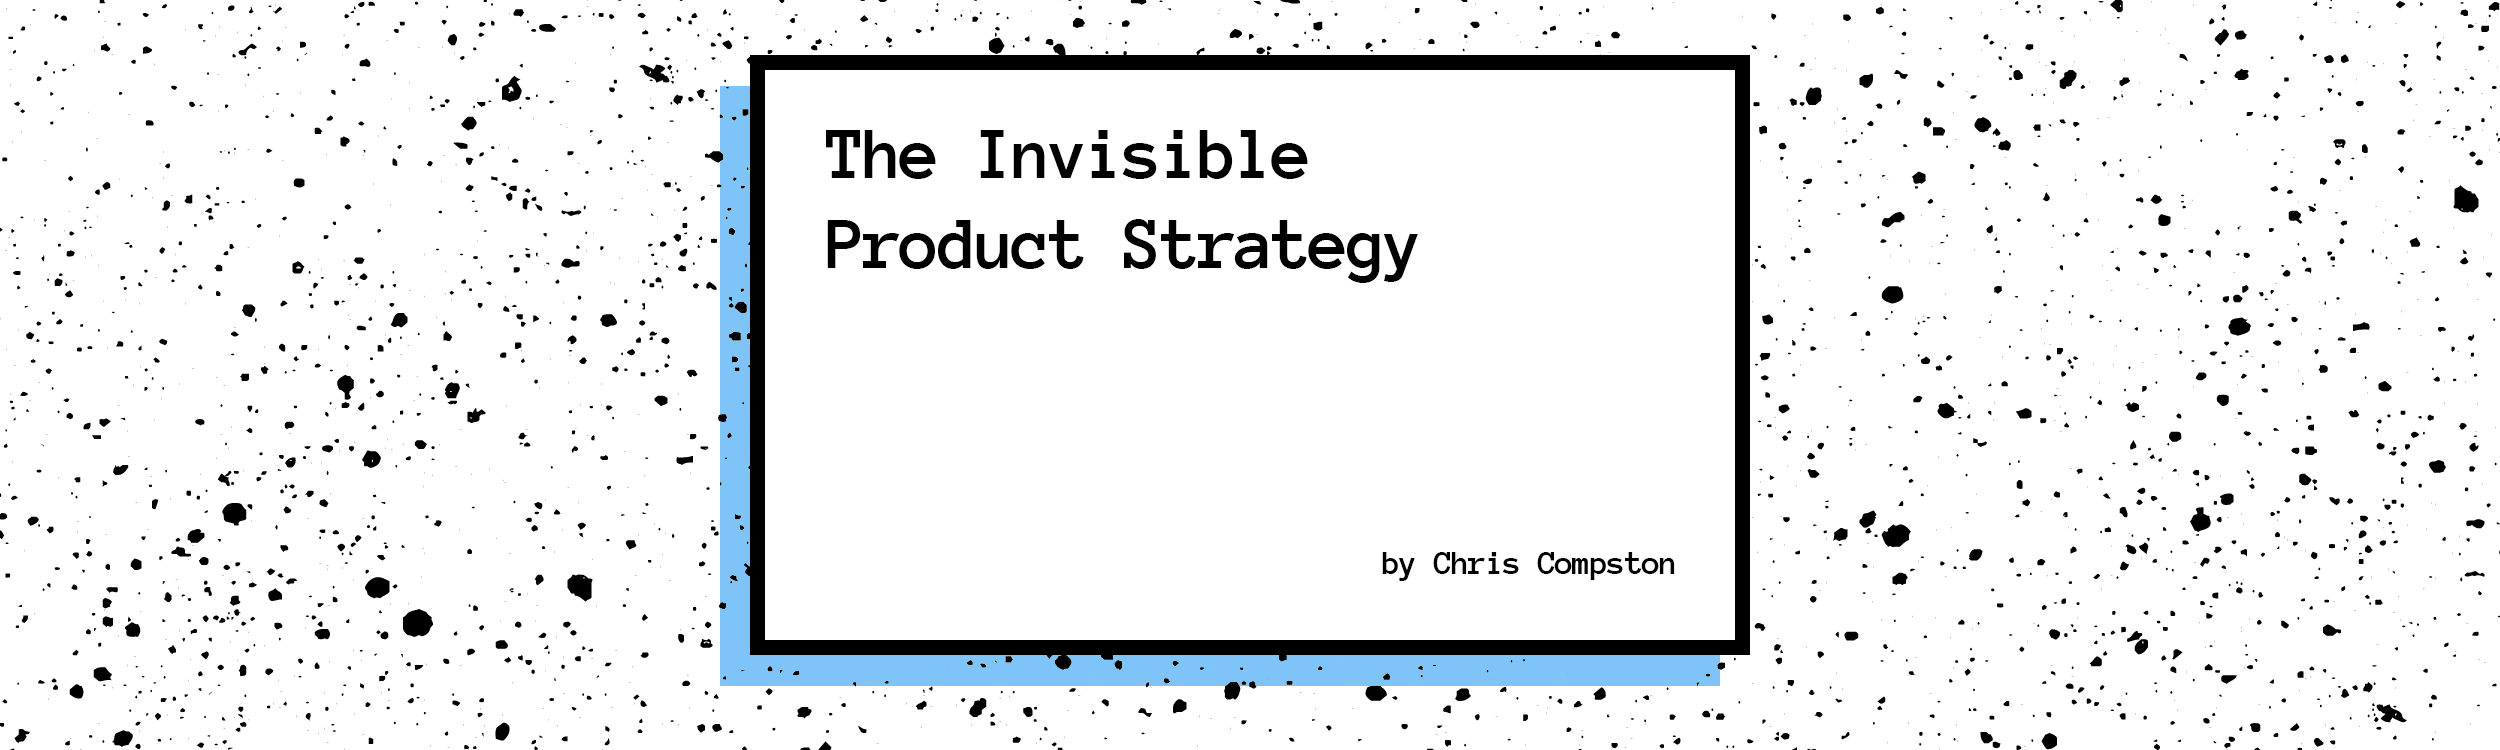 The Invisible Product Strategy